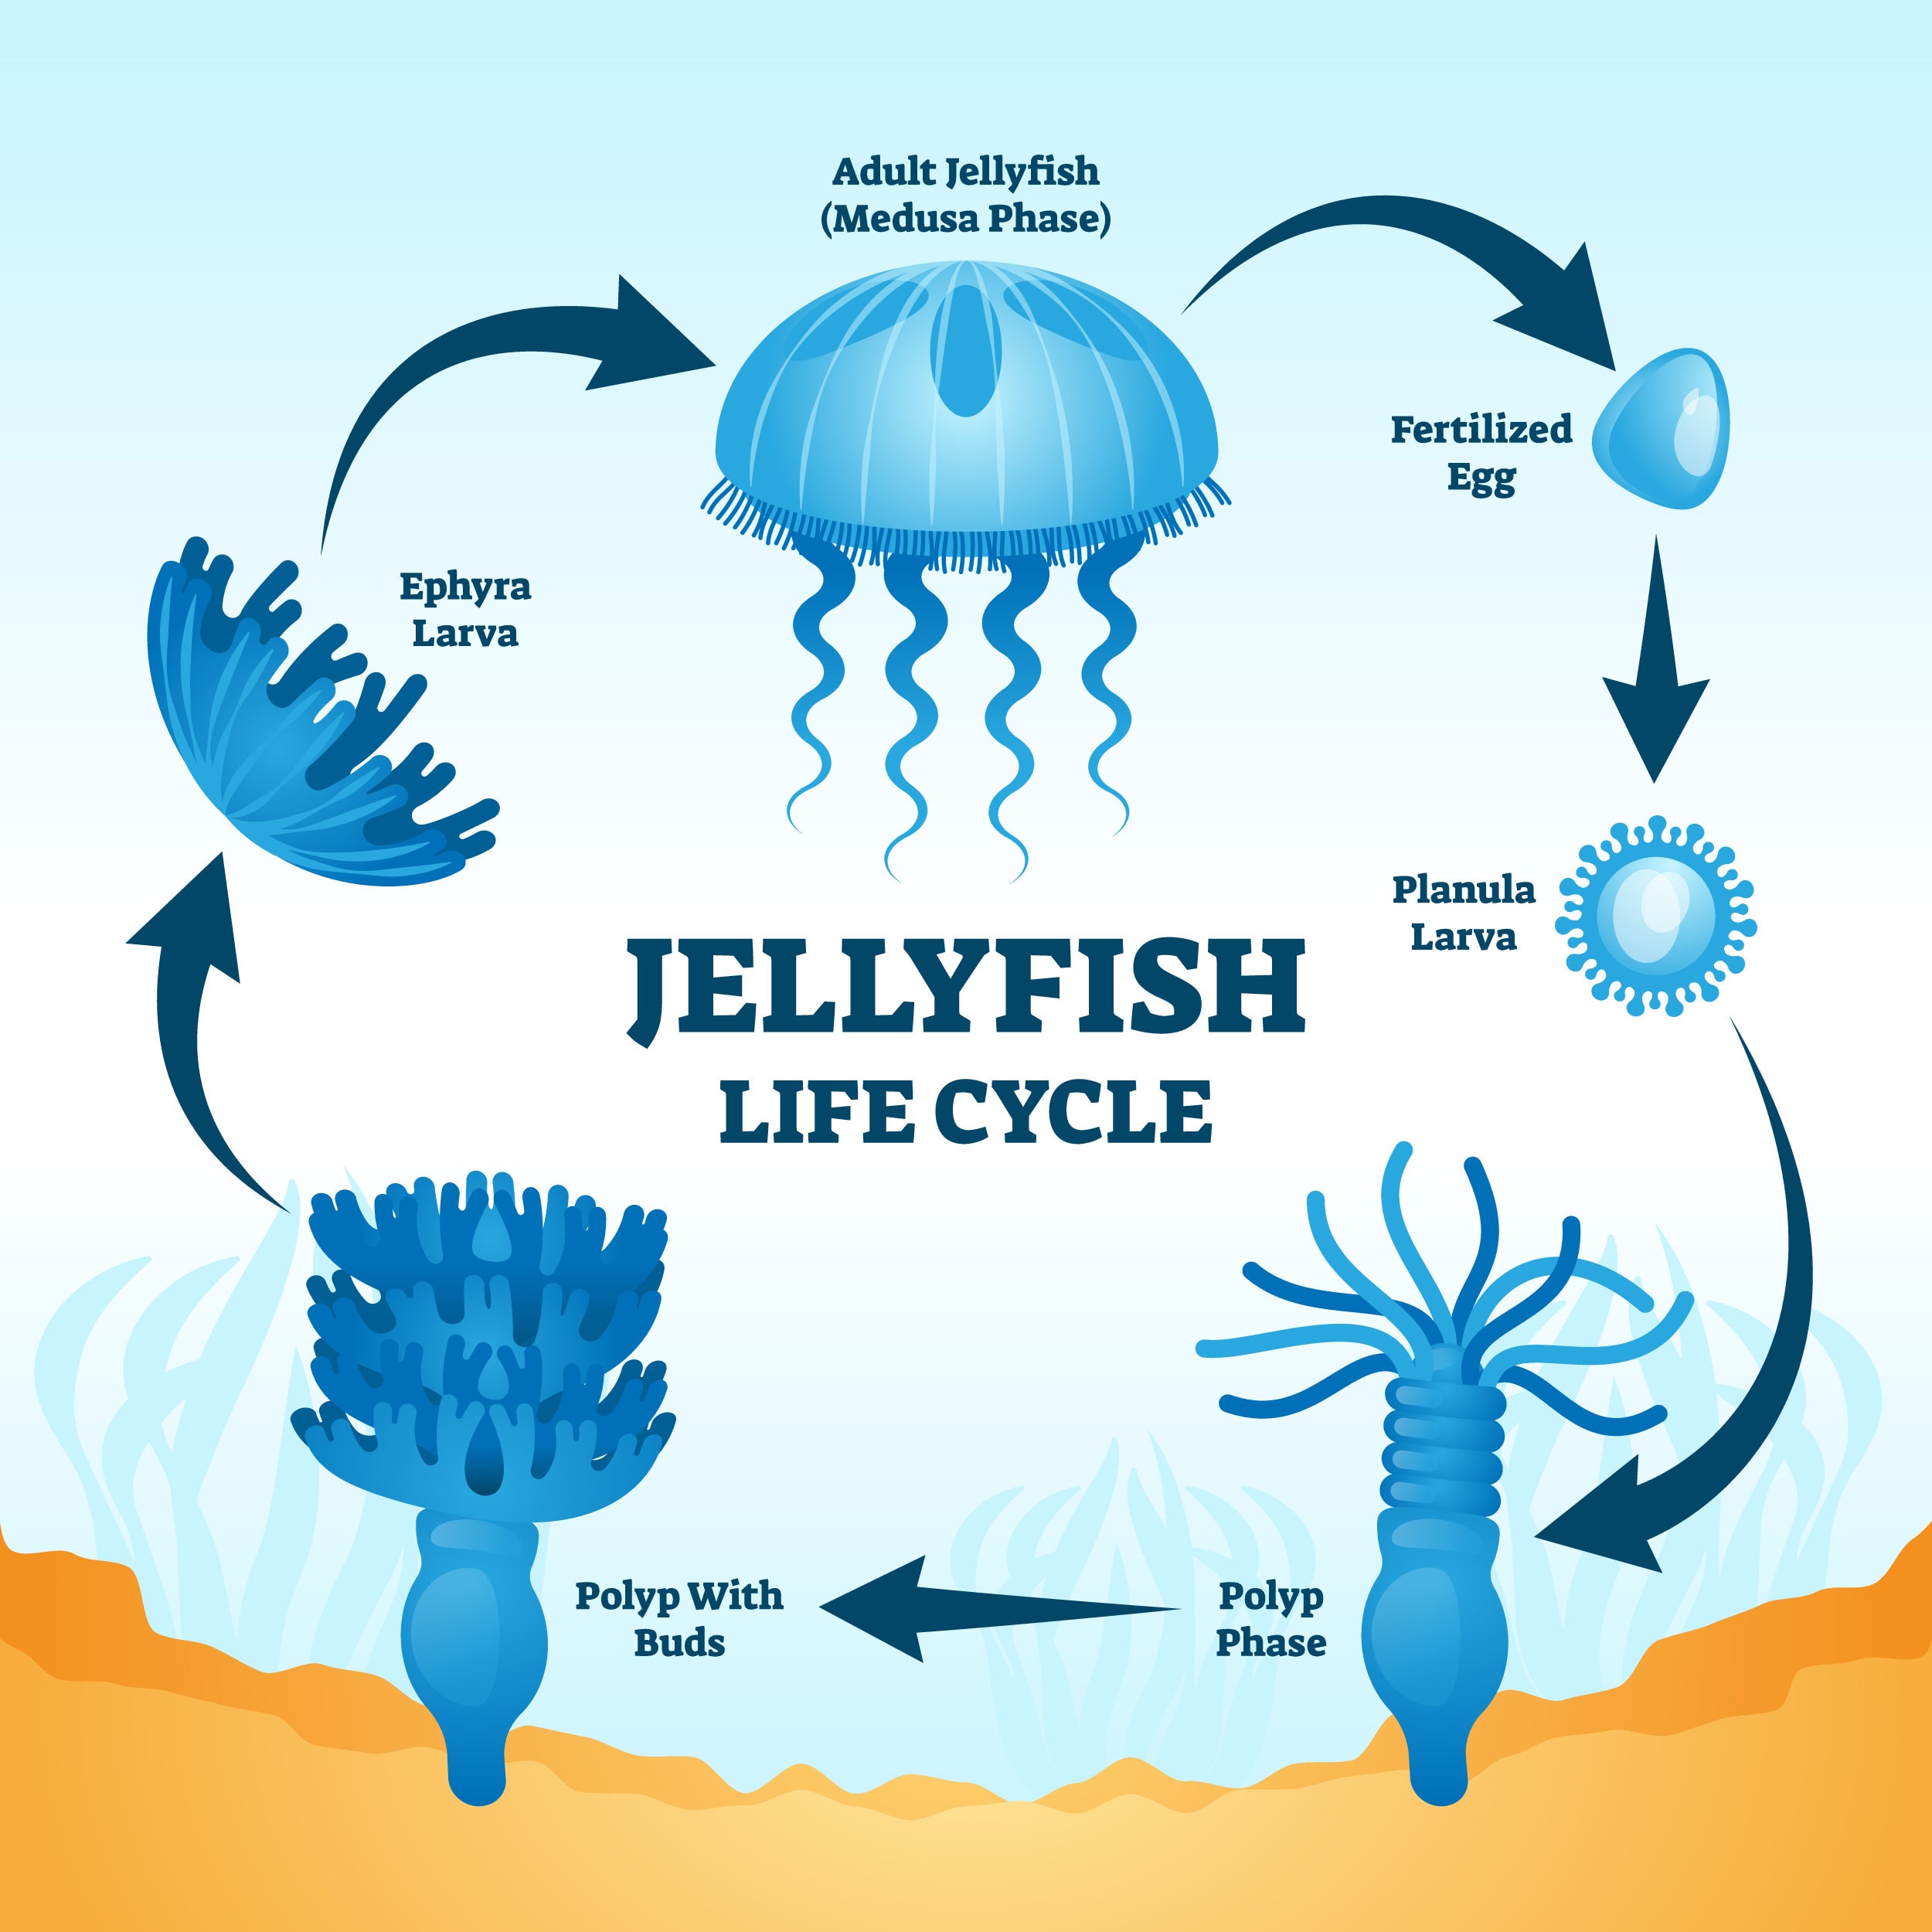 image of a jellyfish lifecycle